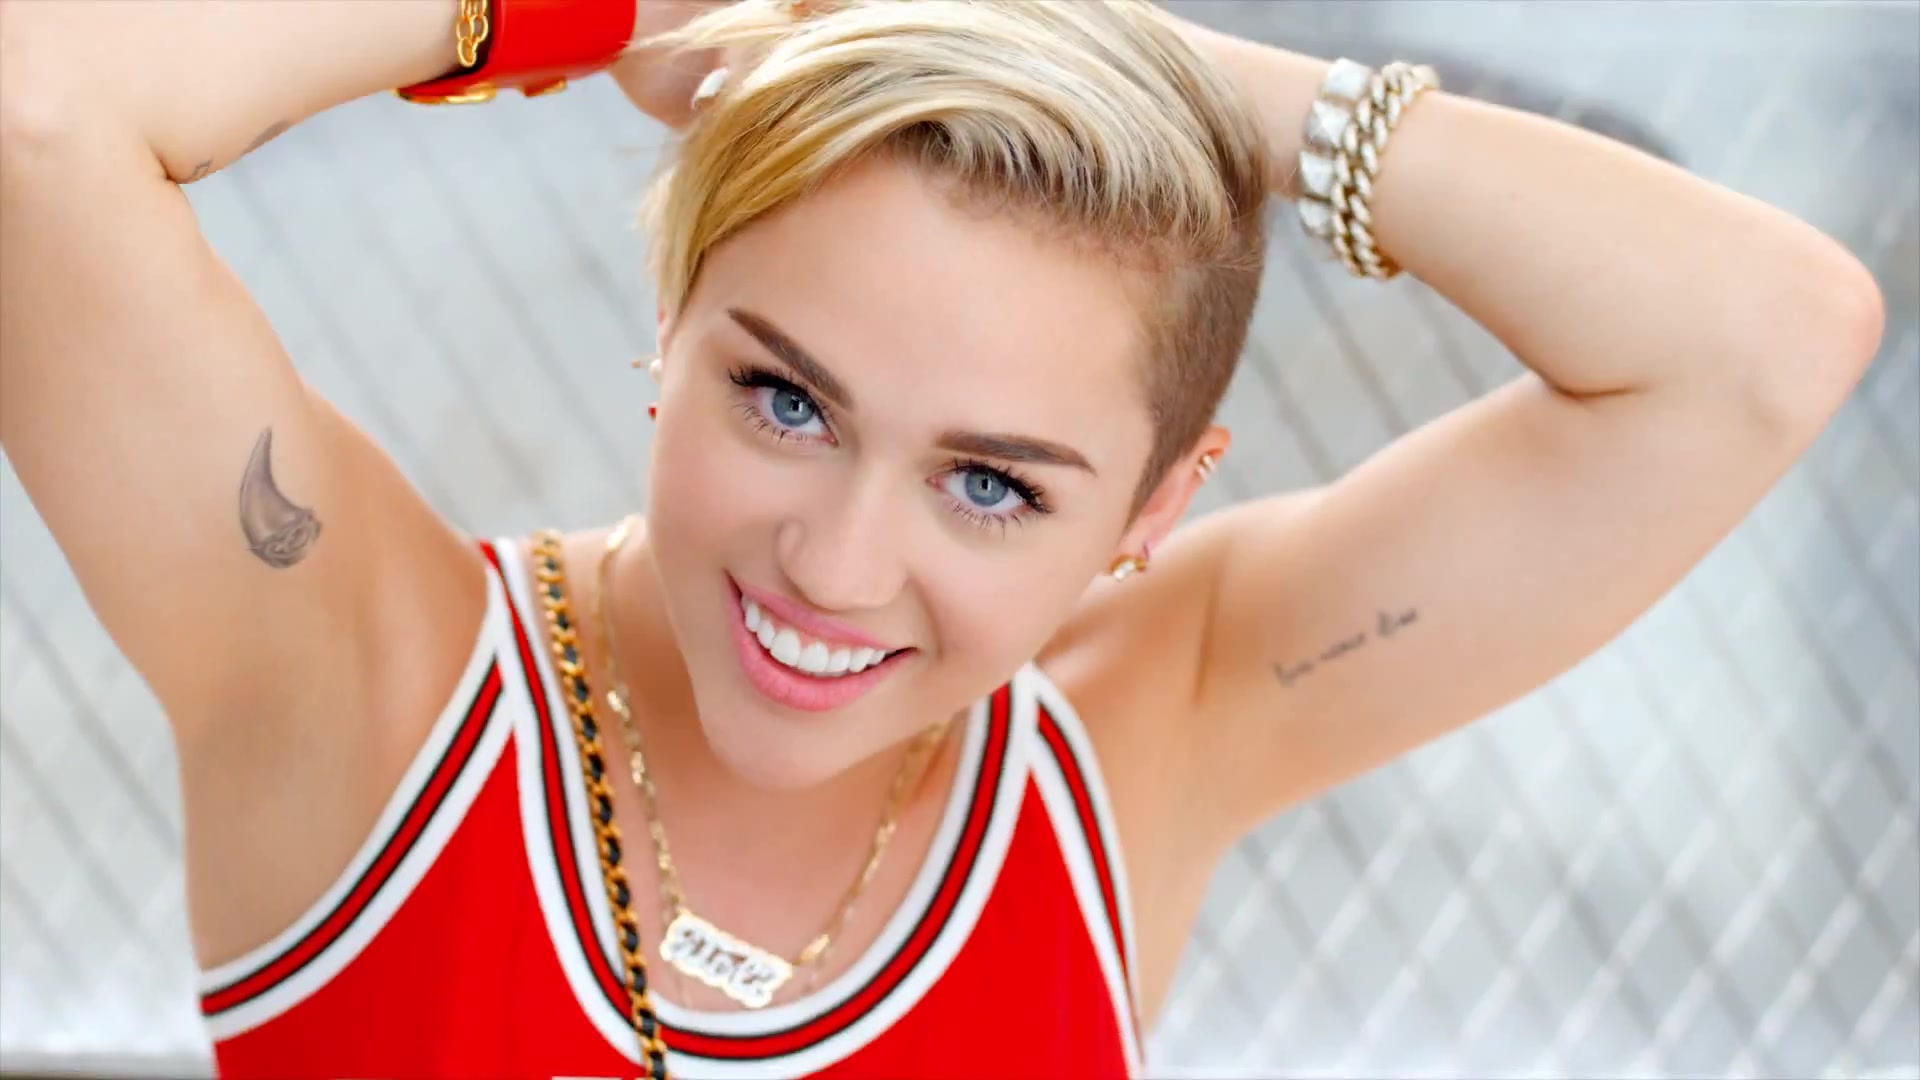 Miley Cyrus HD Wallpaper Background Image